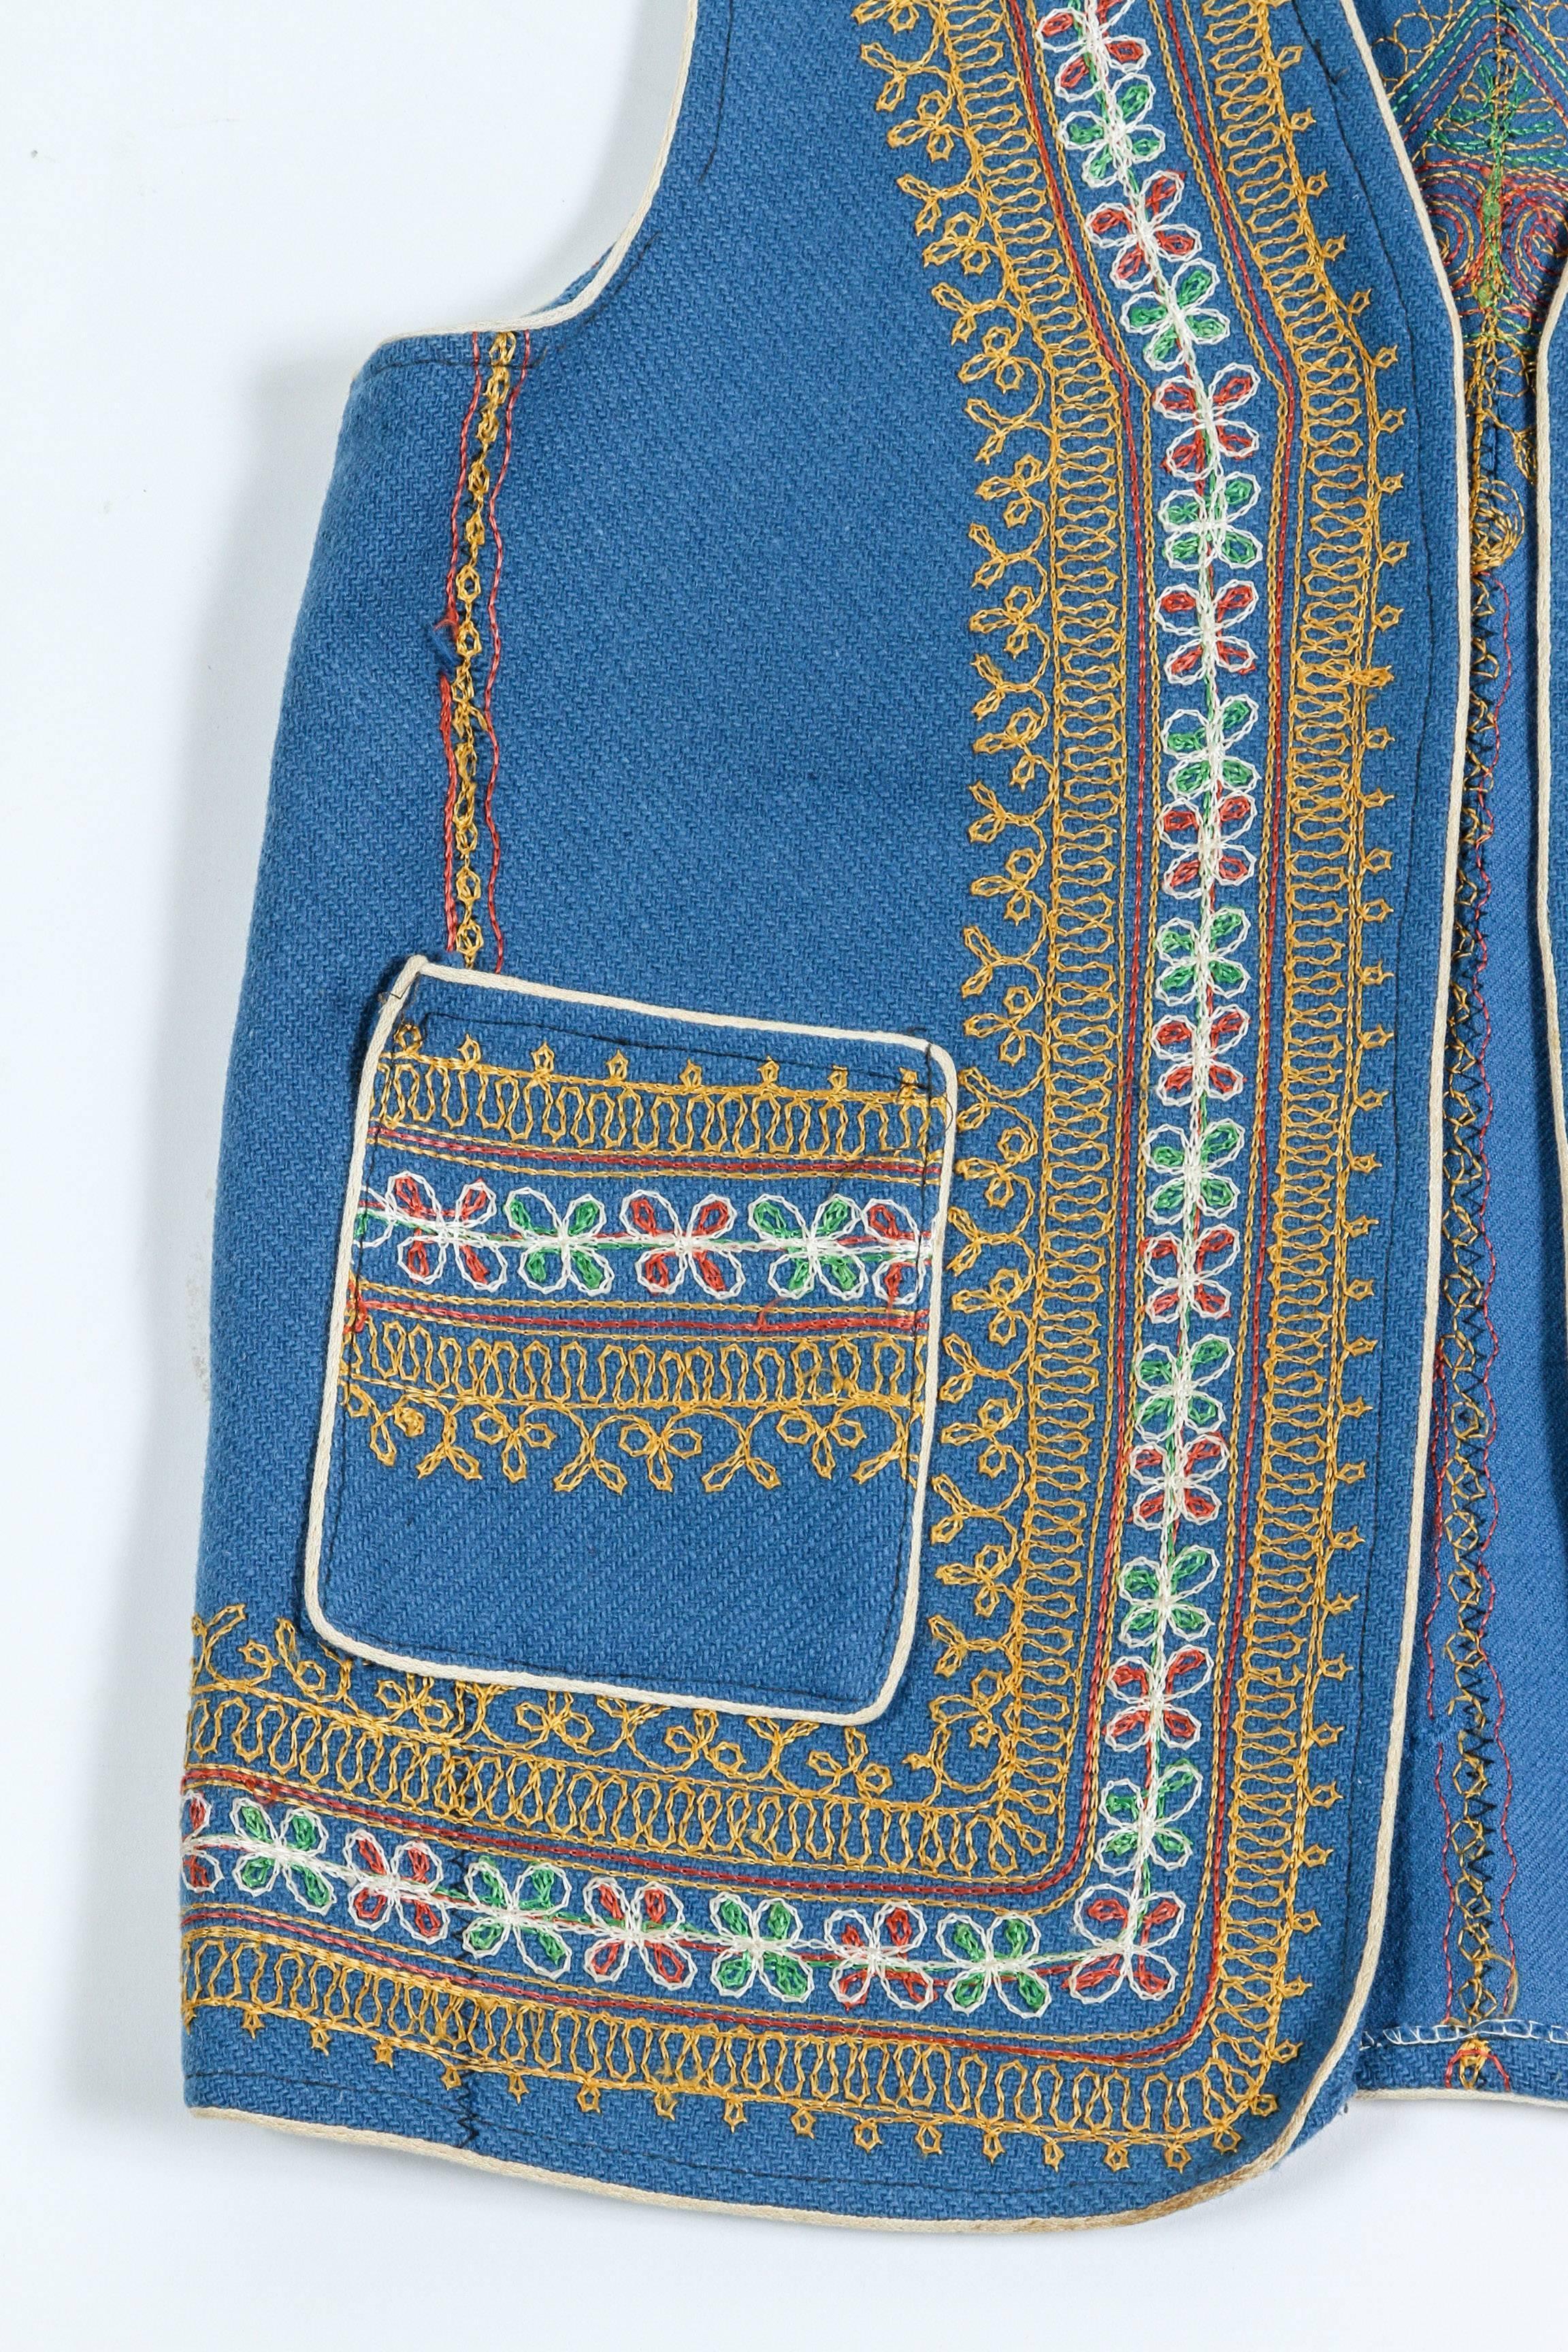 Vintage EthnicTurkish Blue Vest In Good Condition For Sale In North Hollywood, CA